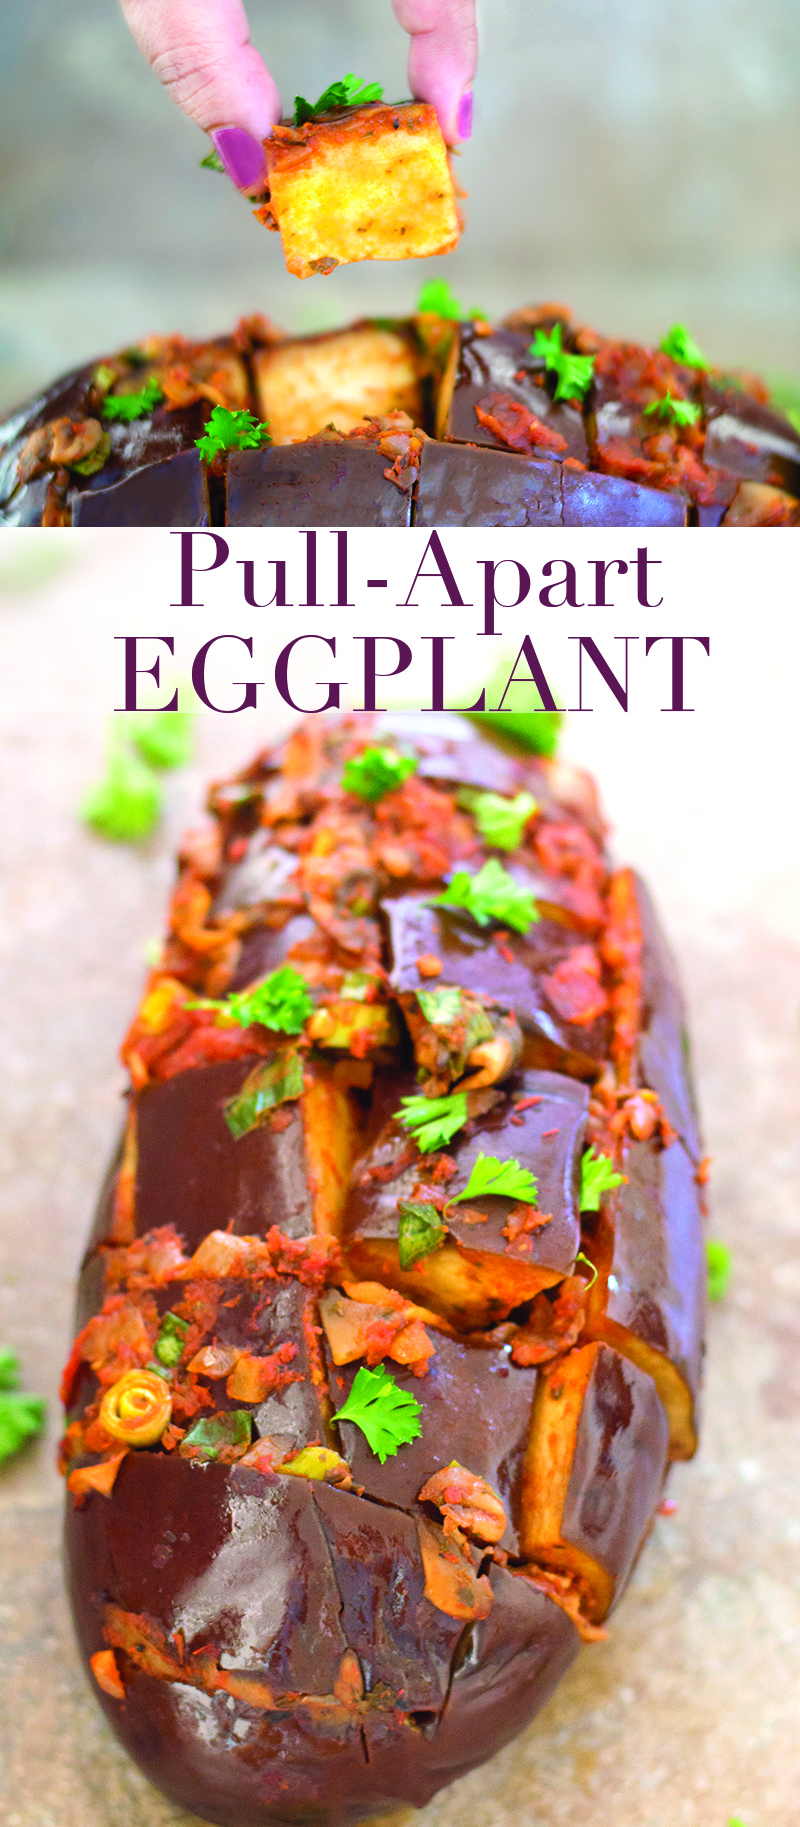 Quick and easy healthy eggplant recipe. This pull-apart eggplant appetizer is so easy to make. Baked eggplant topped with marinara, green onions & mushroom